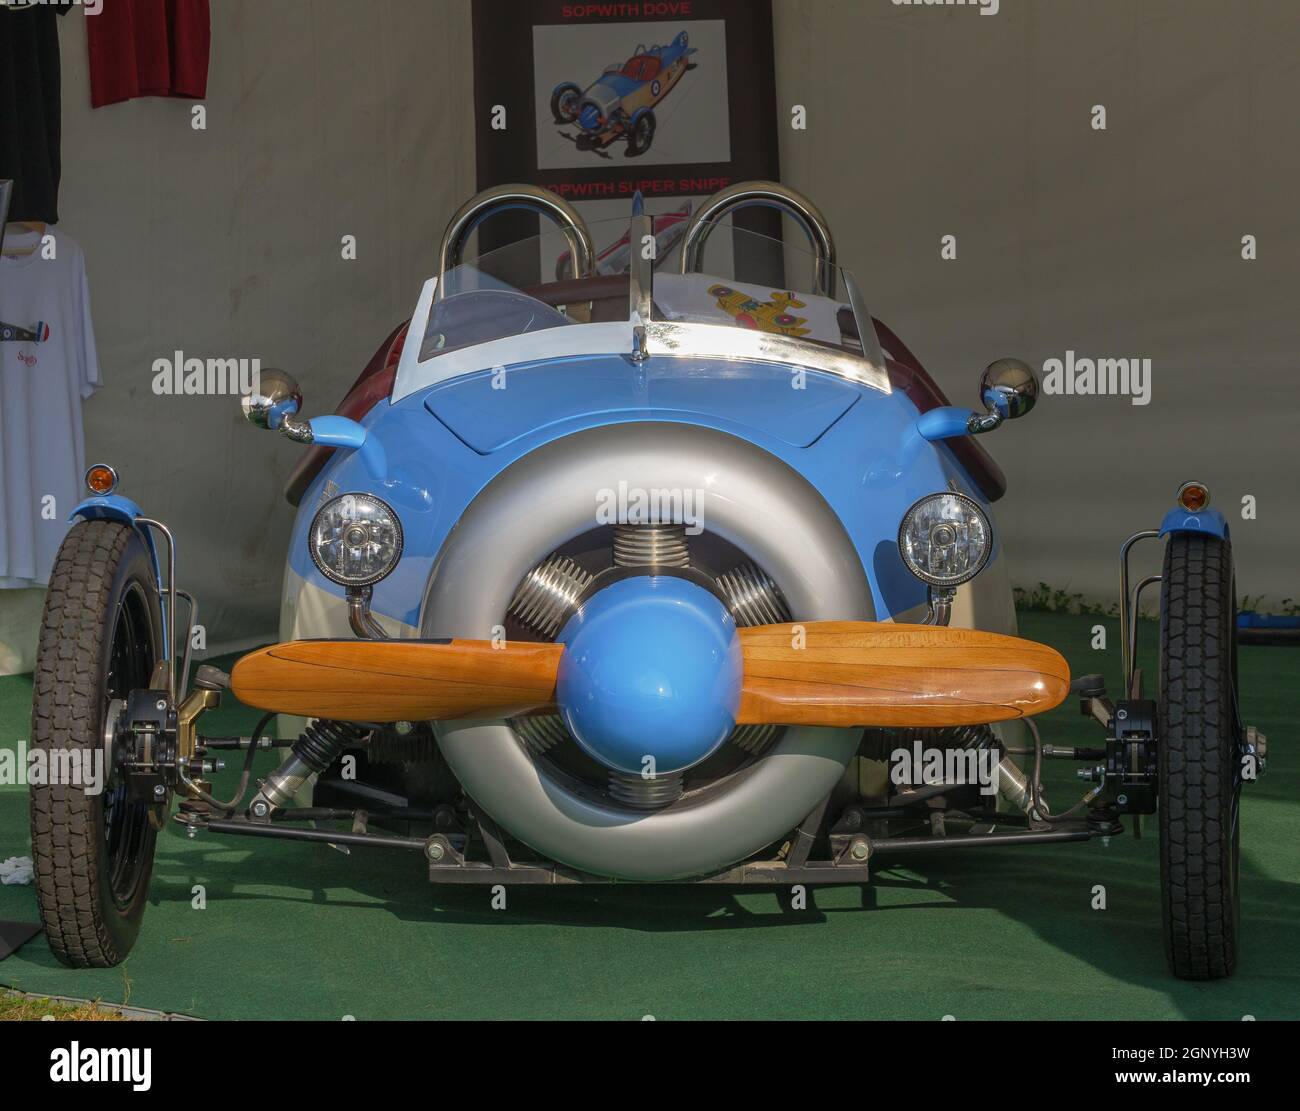 Sopwith Super Snipe car, at the Goodwood Revival 2021, West Sussex, uk Stock Photo